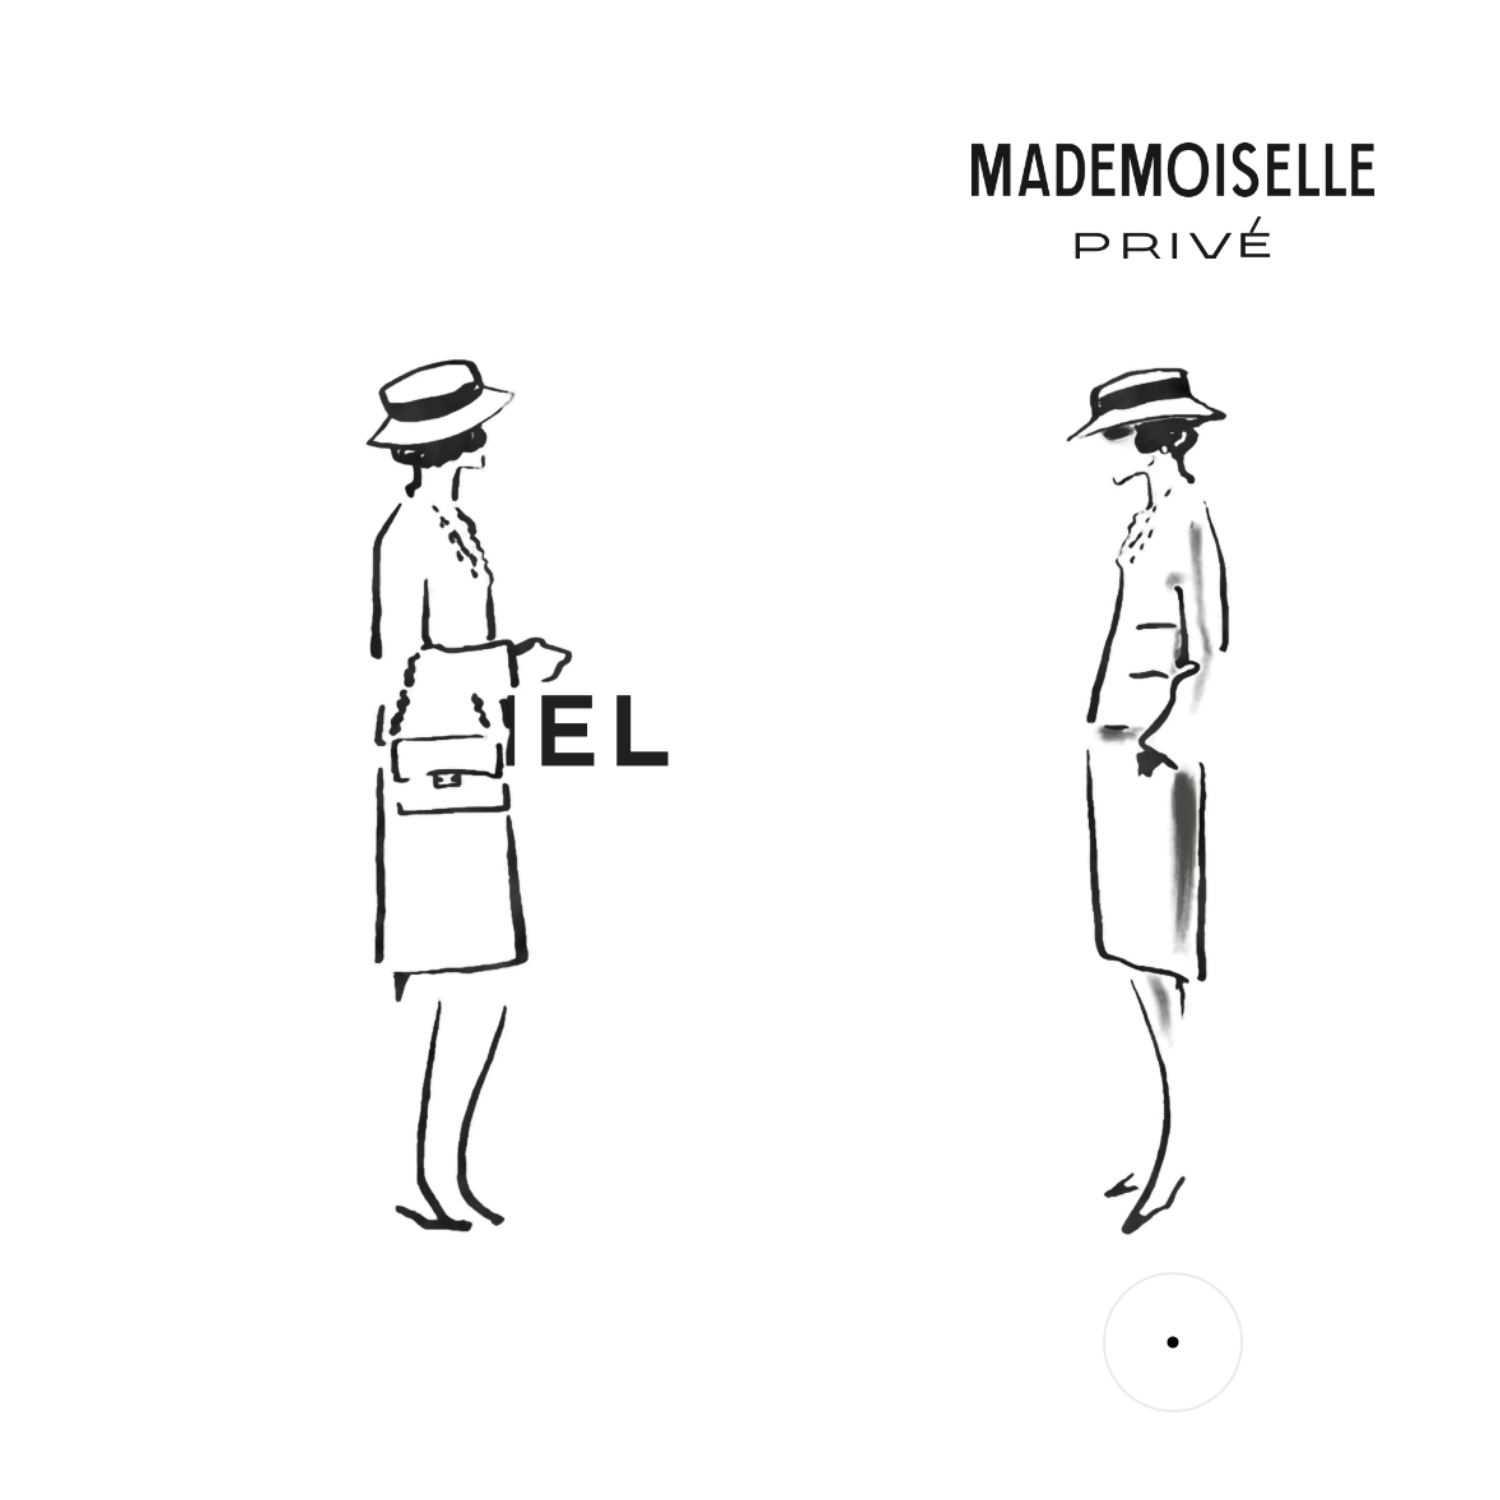 Mademoiselle Privé: Chanel at PMQ